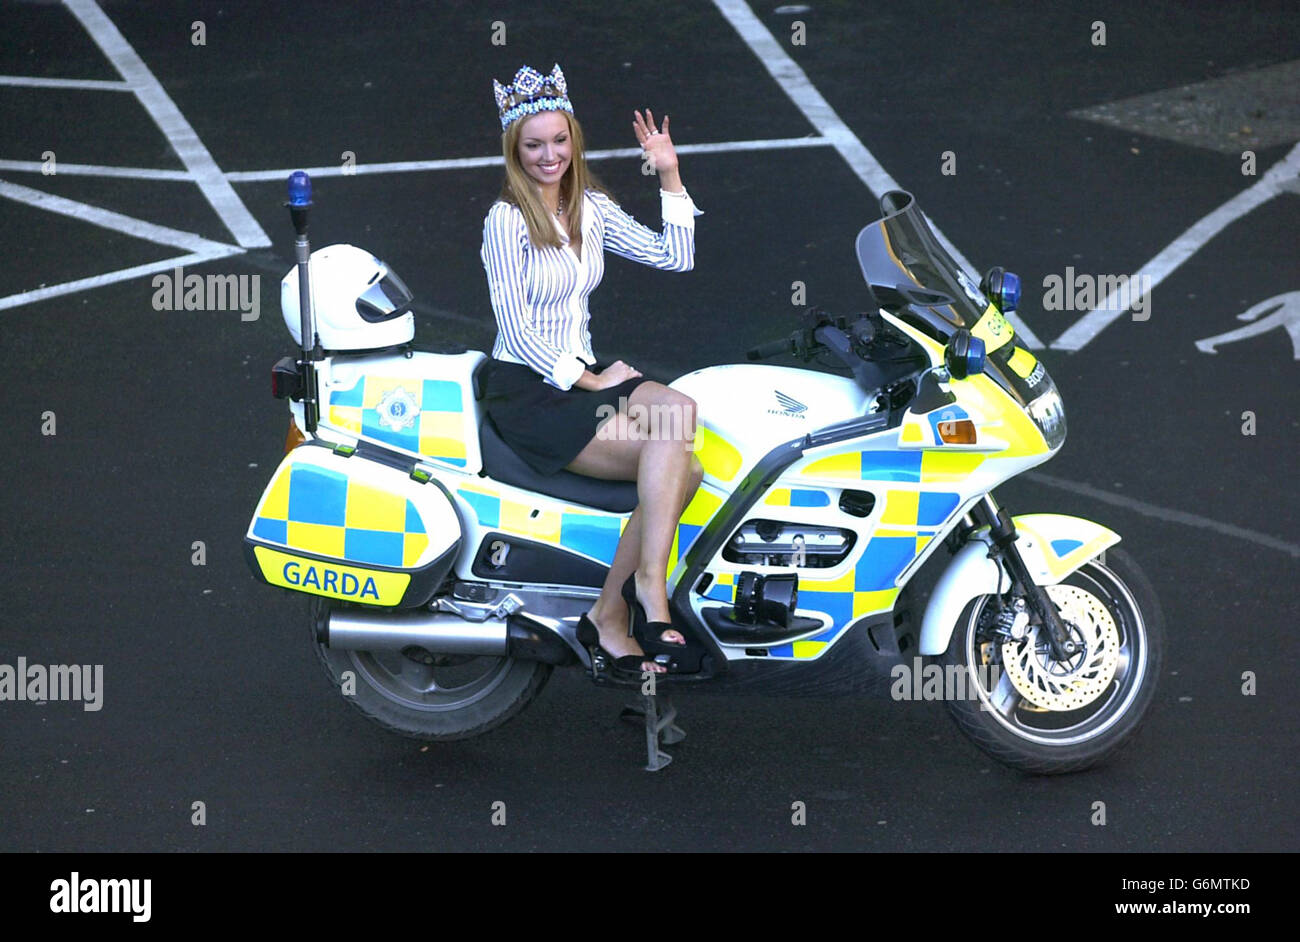 Miss World 2003 winner, Rosanna Davison poses on a Garda Honda motorcycle on her arrival at Dublin Airport. The 19-year-old art student became the first Irish contestant to claim the title when she saw off the challenge of 105 competitors in the beauty pageant at the weekend. Stock Photo